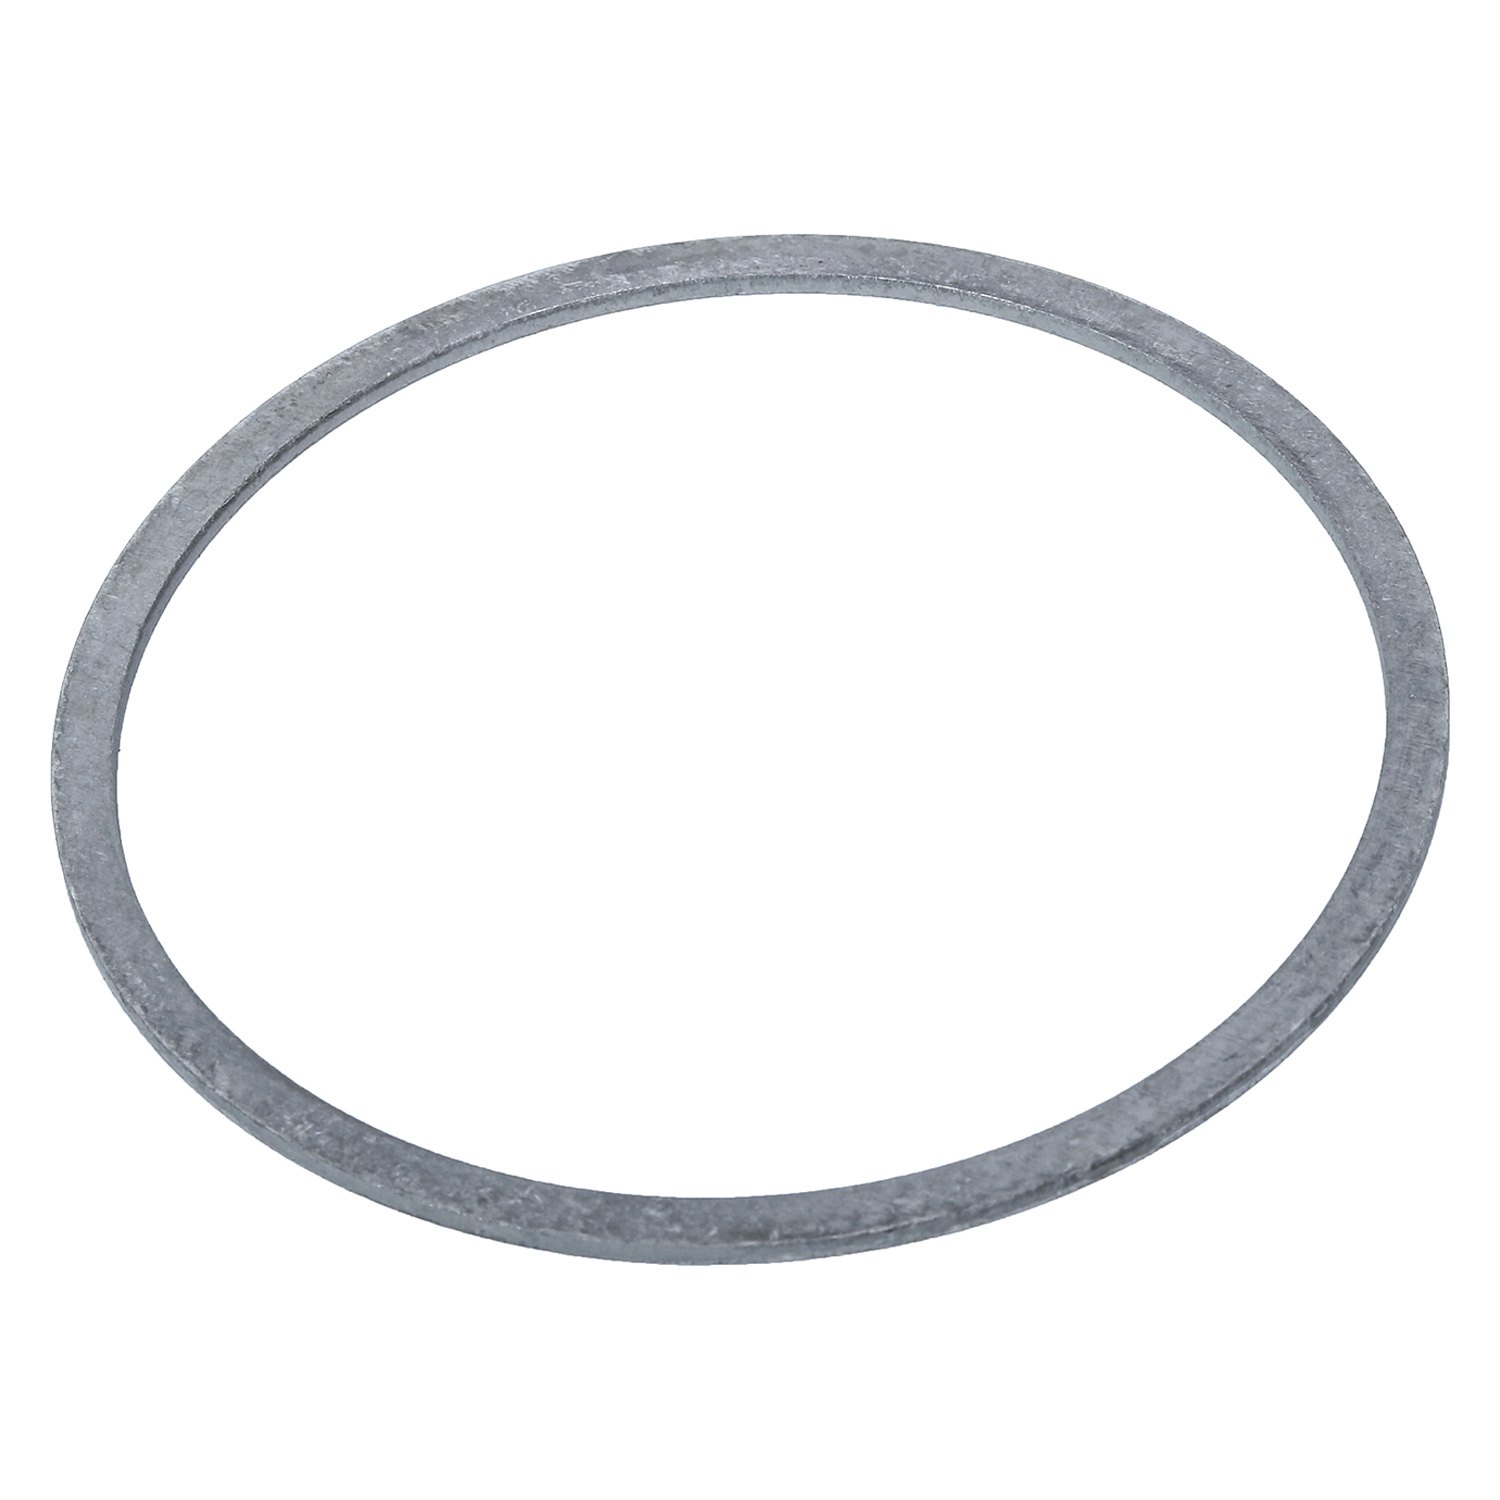 GM Genuine Parts 88996705 Differential Bearing Shim 